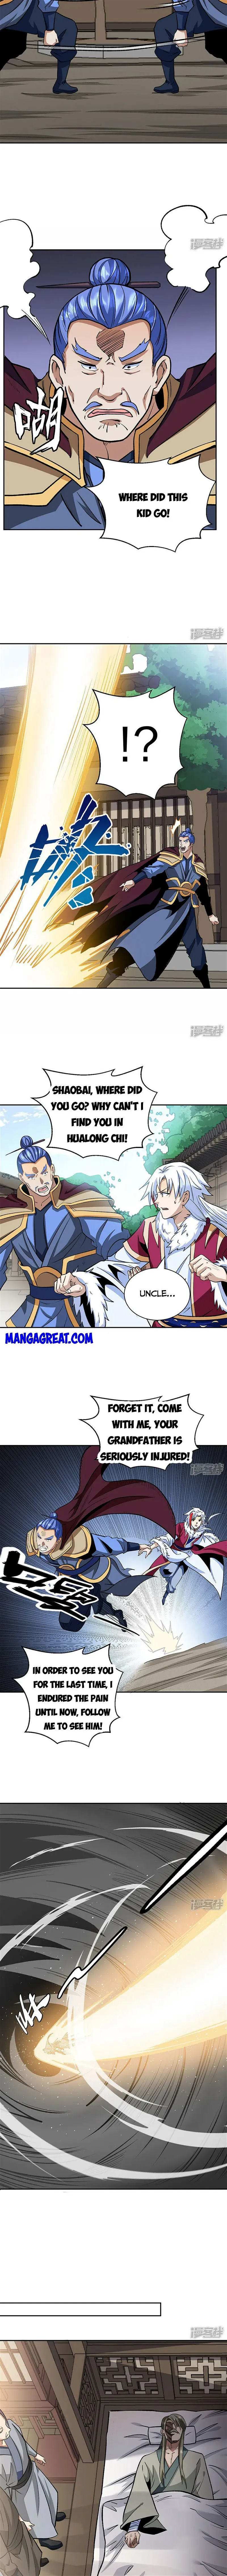 Martial Arts Reigns Chapter 530 page 6 - MangaWeebs.in